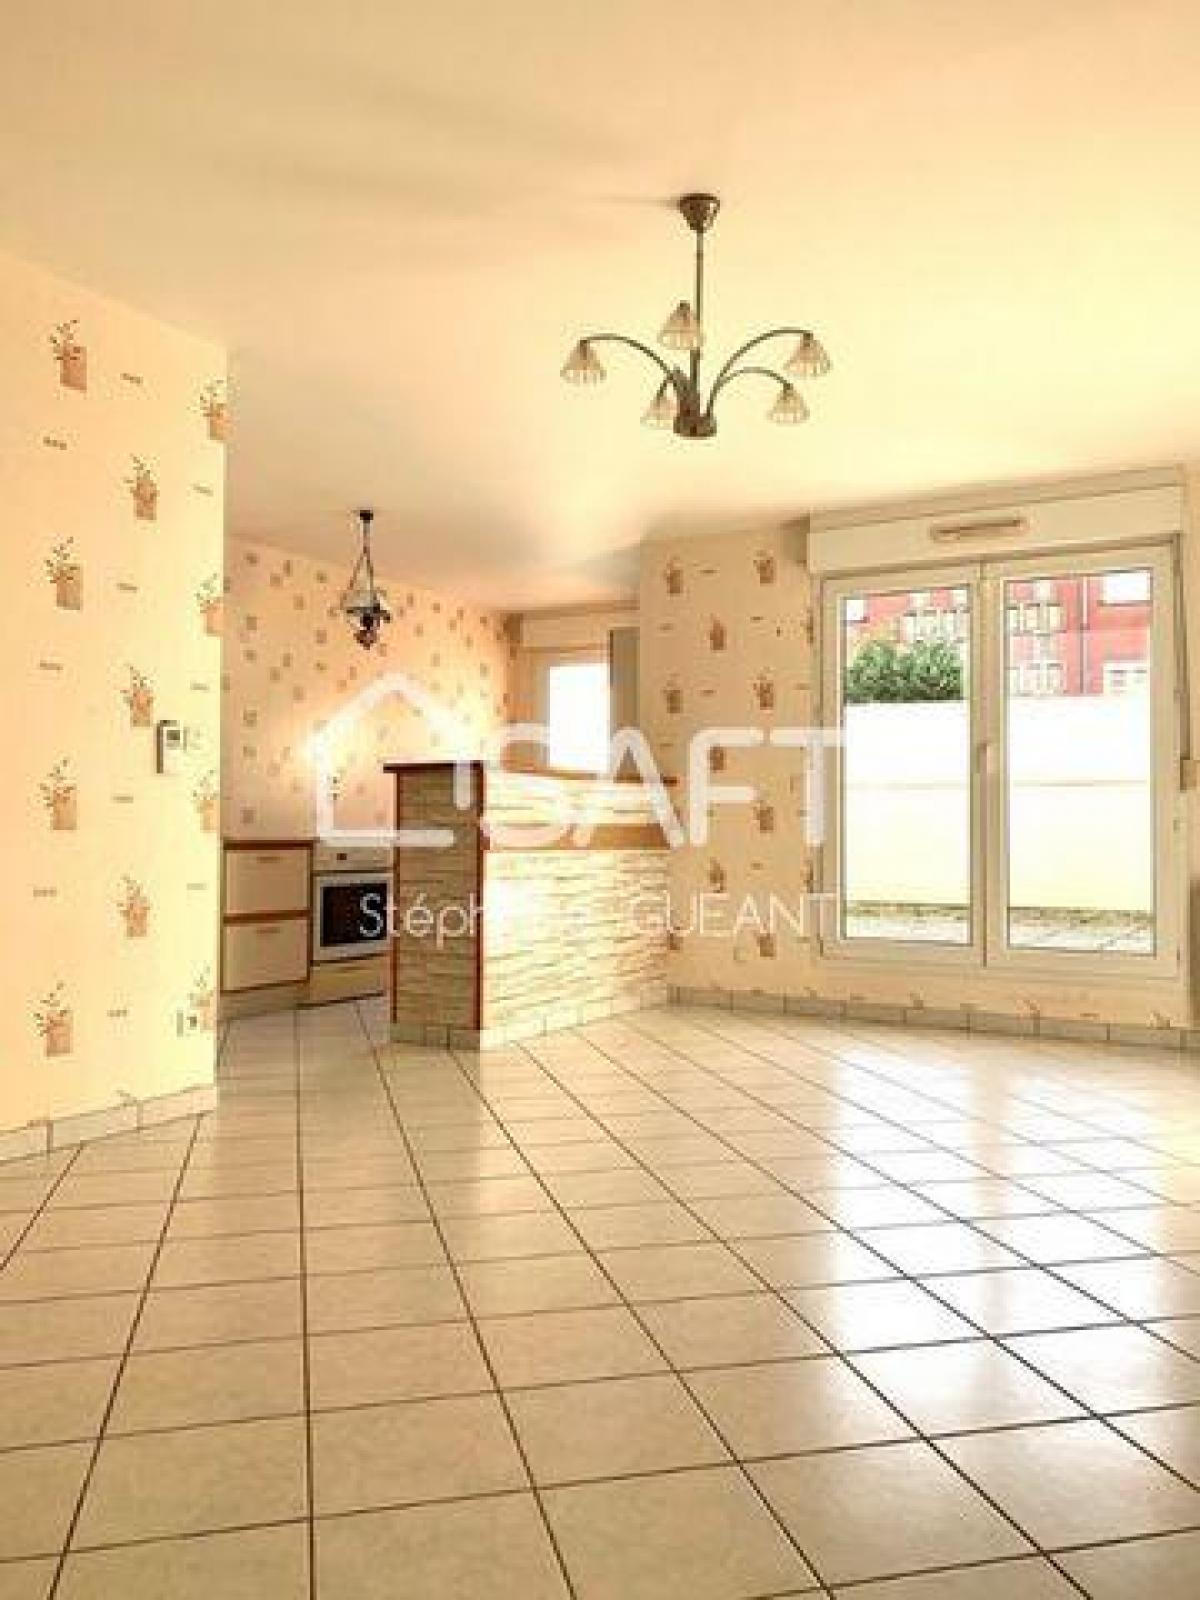 Picture of Apartment For Sale in Abbeville, Picardie, France